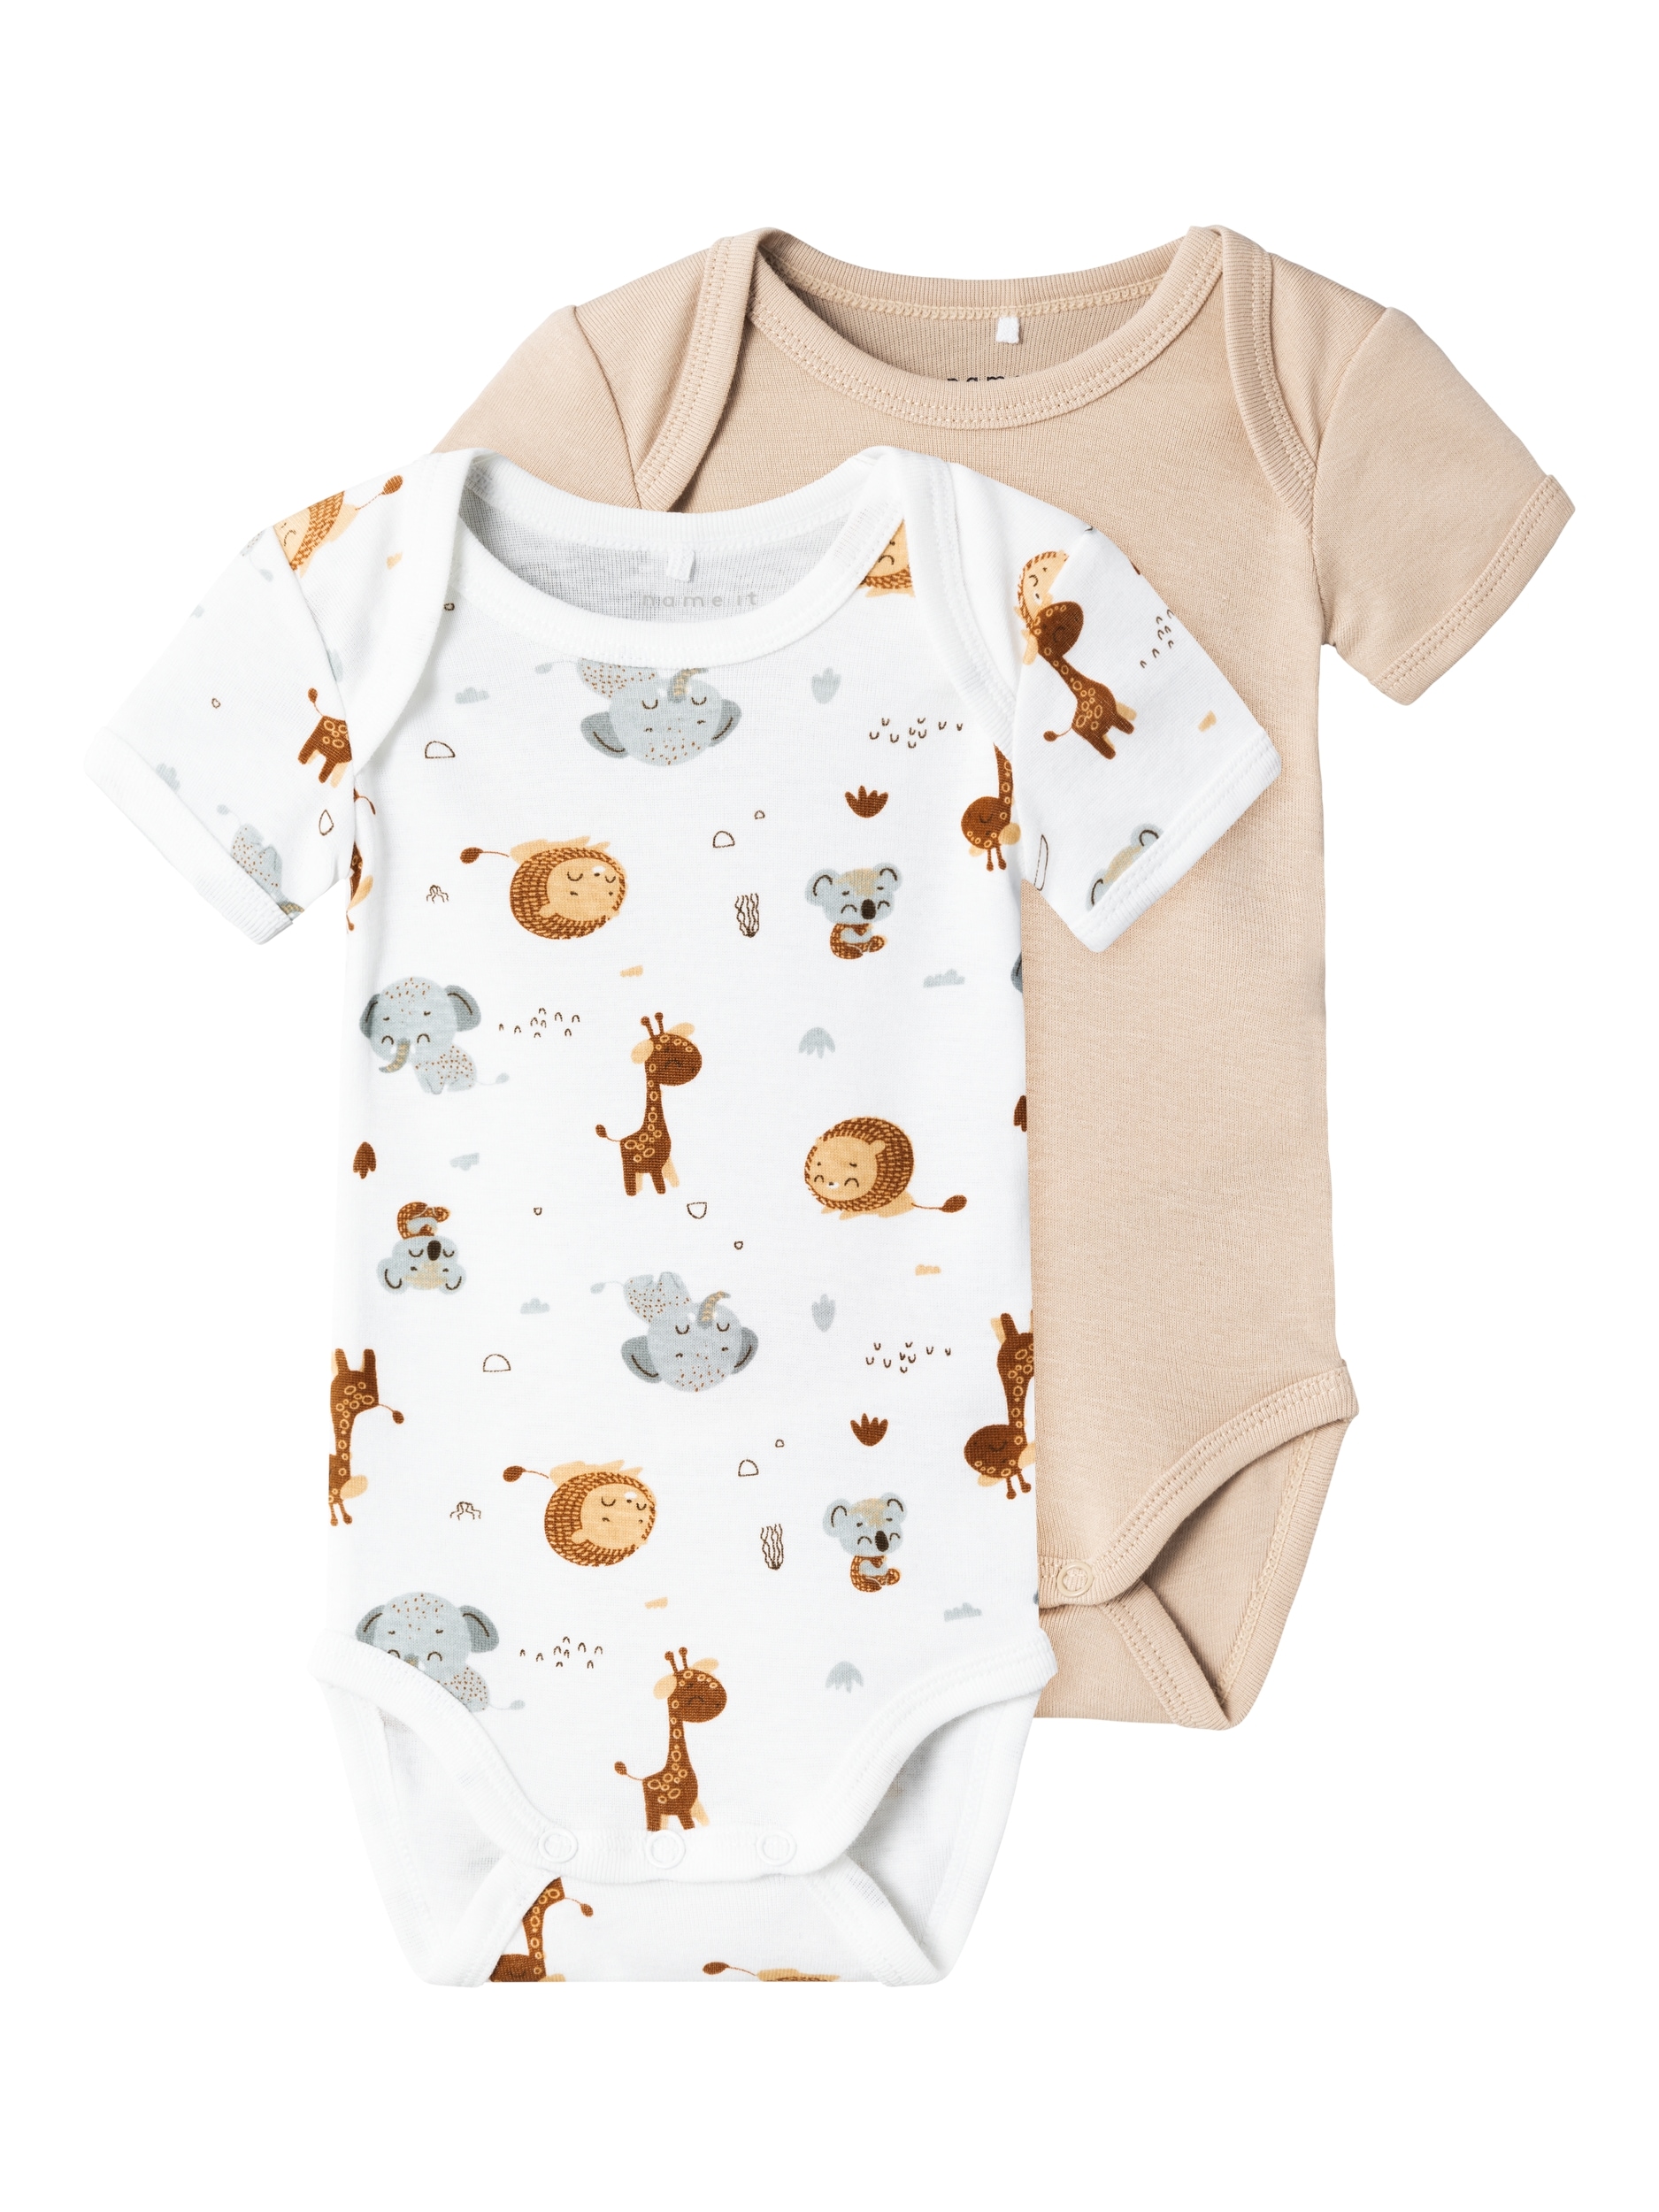 SS It 2P tlg.) Name ANIMAL bei NOOS«, (Packung, ♕ 2 Body »NBNBODY BEIGE